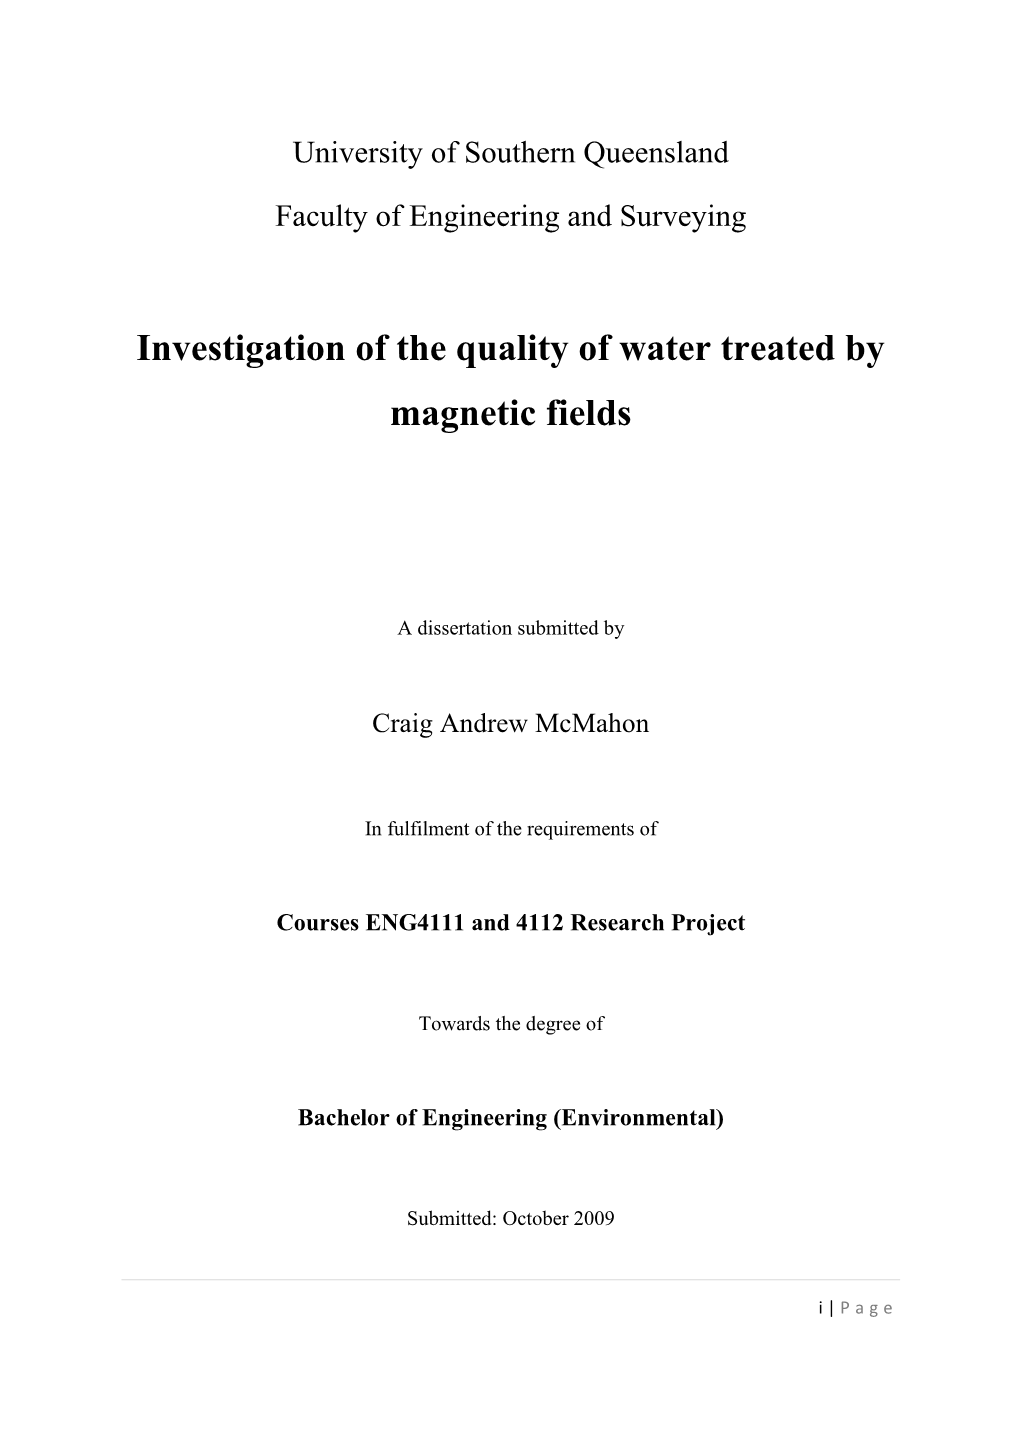 Investigation of the Quality of Water Treated by Magnetic Fields